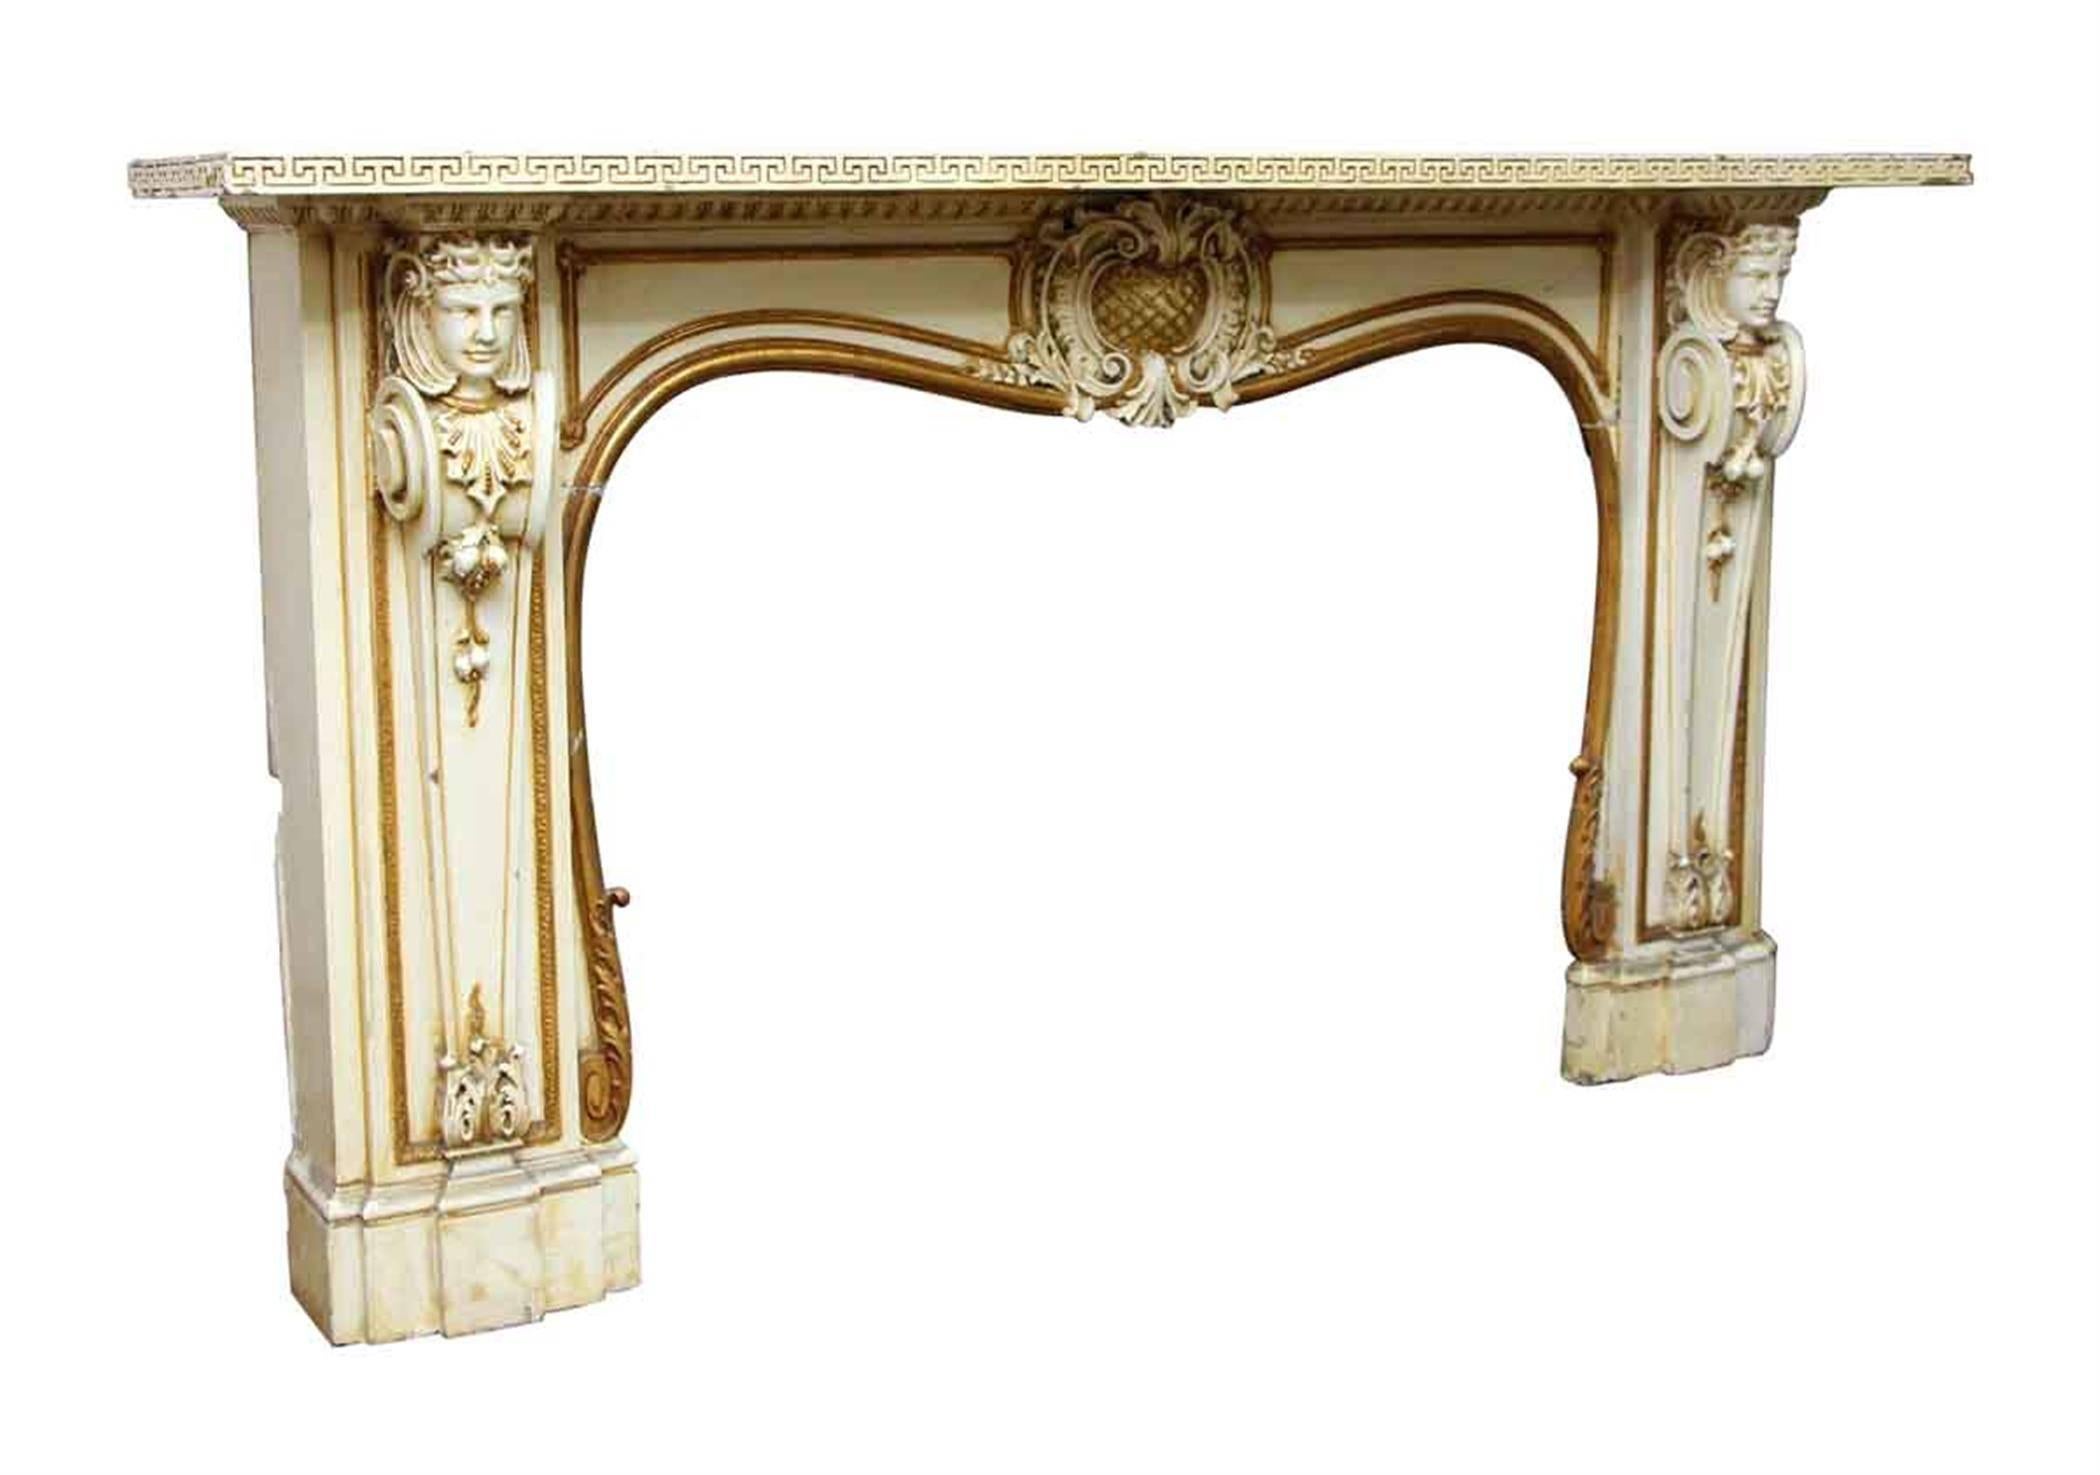 1930s cream and gold painted wooden mantel with two figures adorning each side. Rescued from a Park Ave apartment. This can be seen at our 400 Gilligan St location in Scranton, PA.